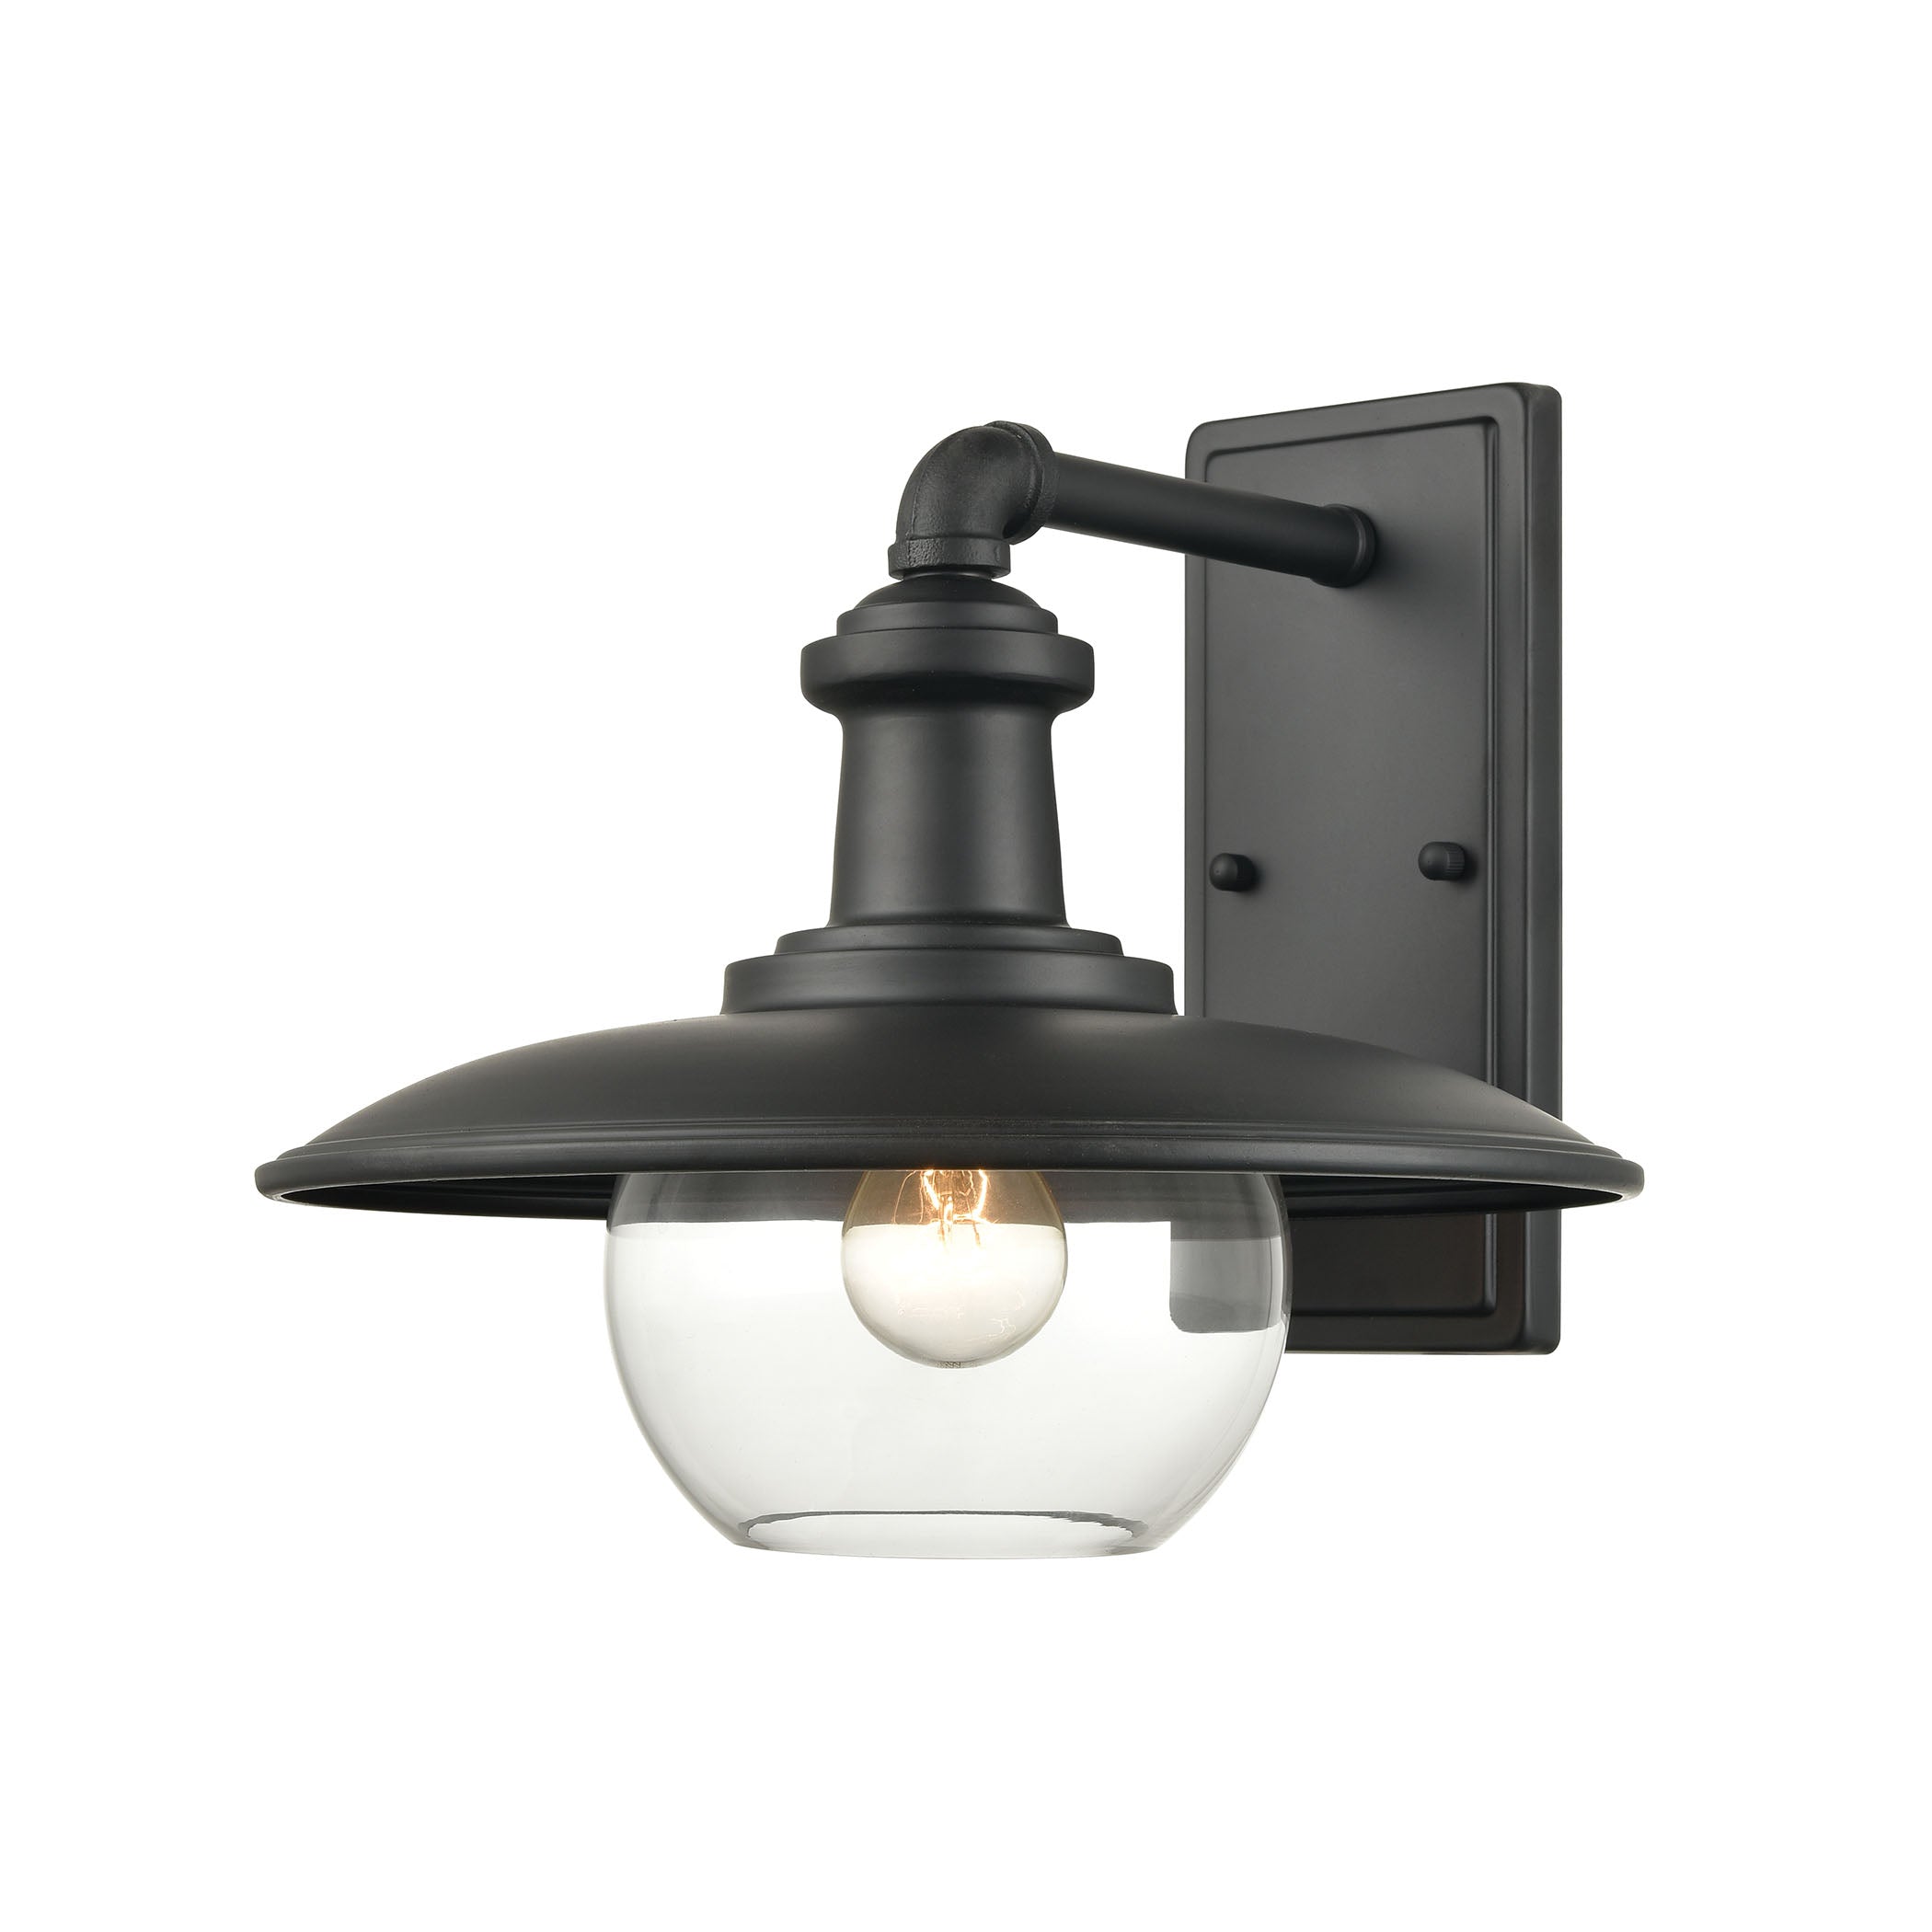 ELK Lighting 45431/1 Jackson 1-Light Outdoor Sconce in Matte Black with Clear Glass